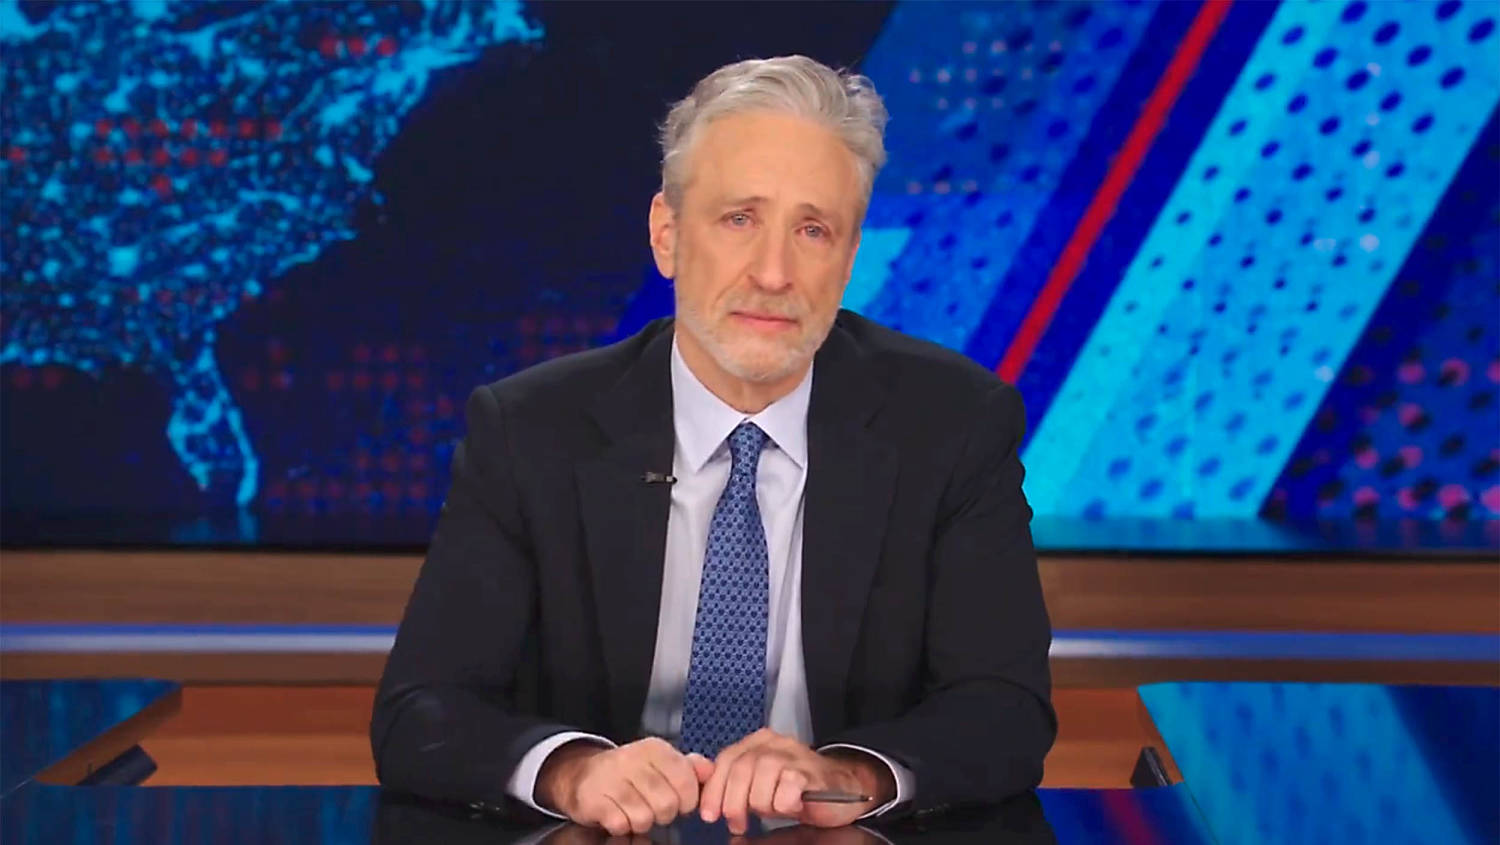 Jon Stewart breaks down in tears over death of his dog, Dipper, during 'Daily Show' tribute